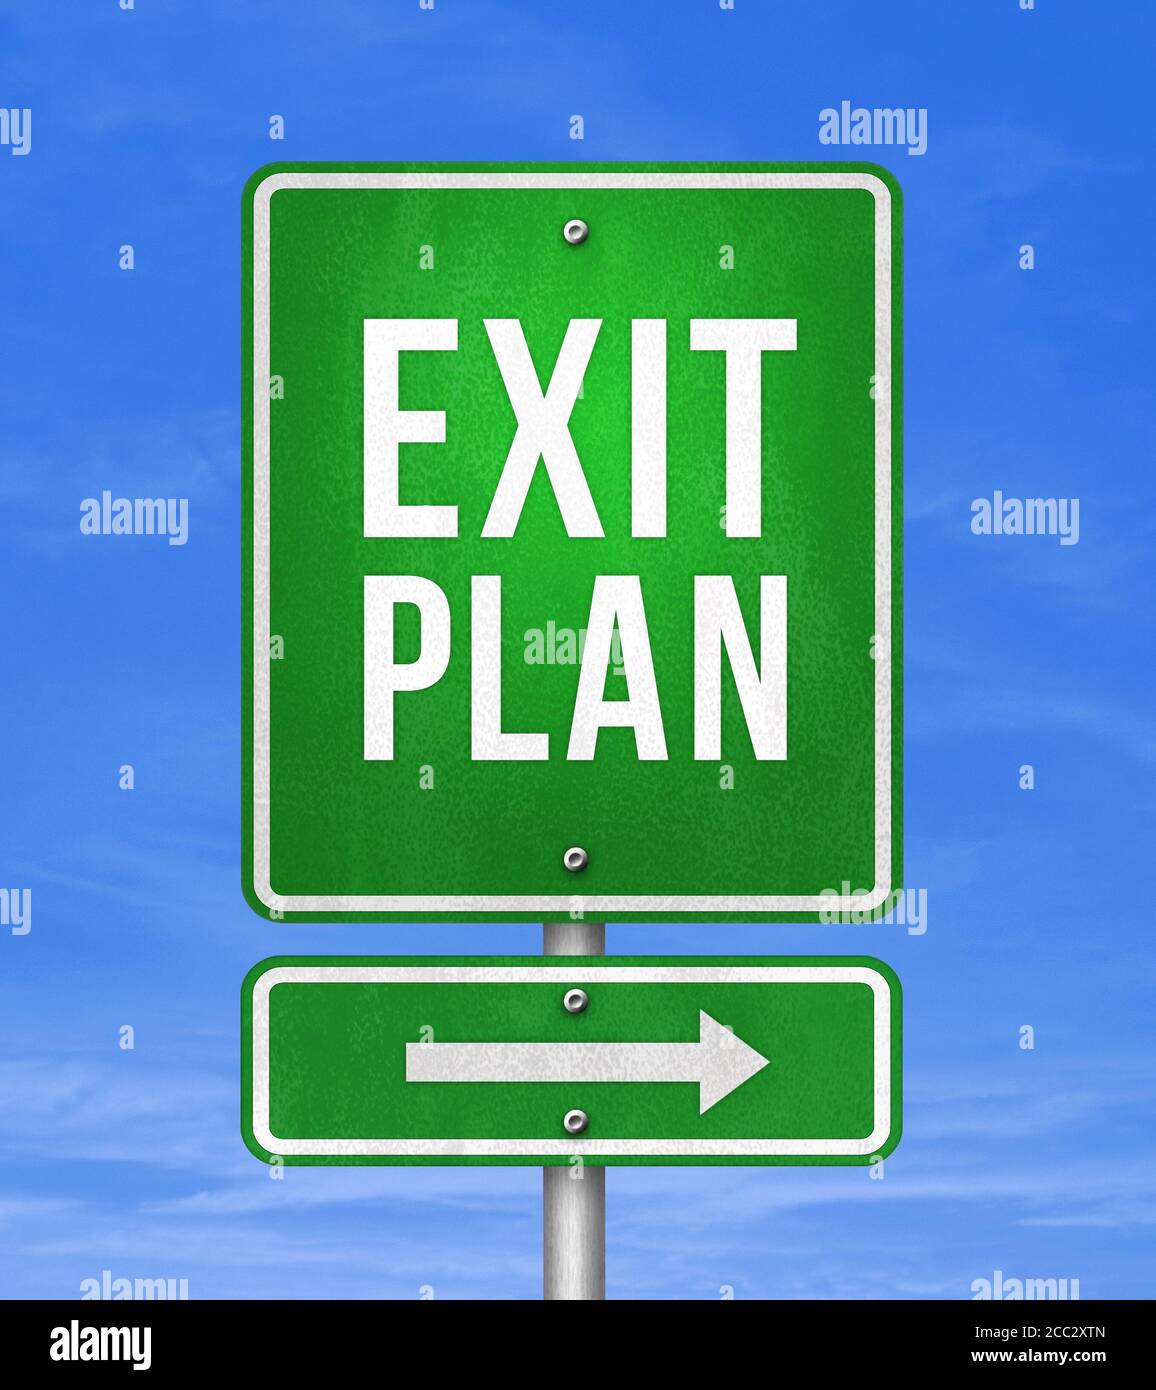 Exit Plan - roadsign message as 3D illustration Stock Photo